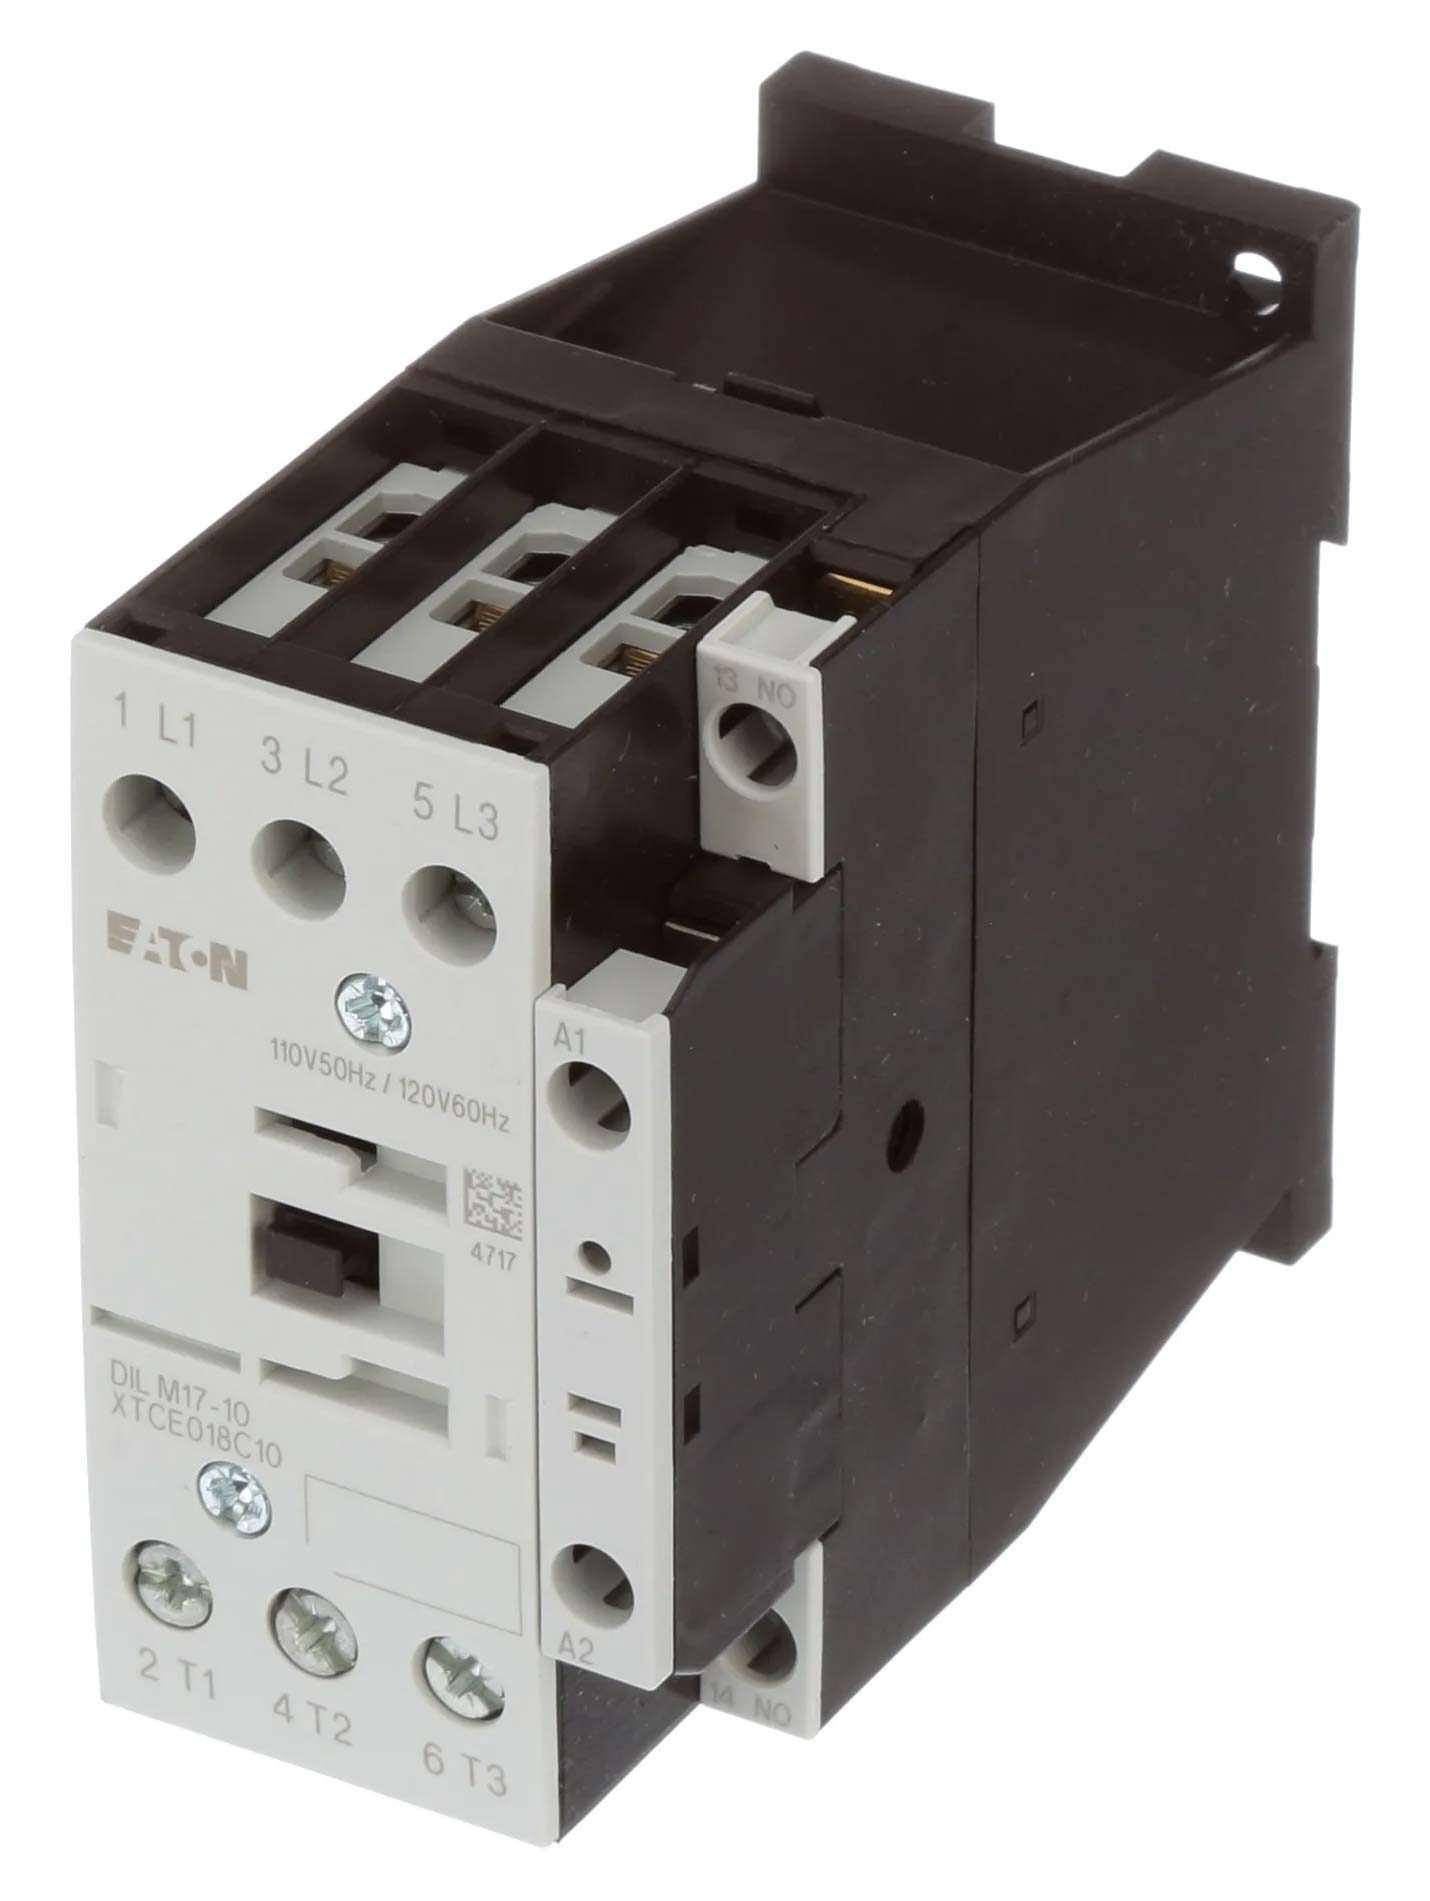 XTCE018C10A - Eaton - Magnetic Contactor